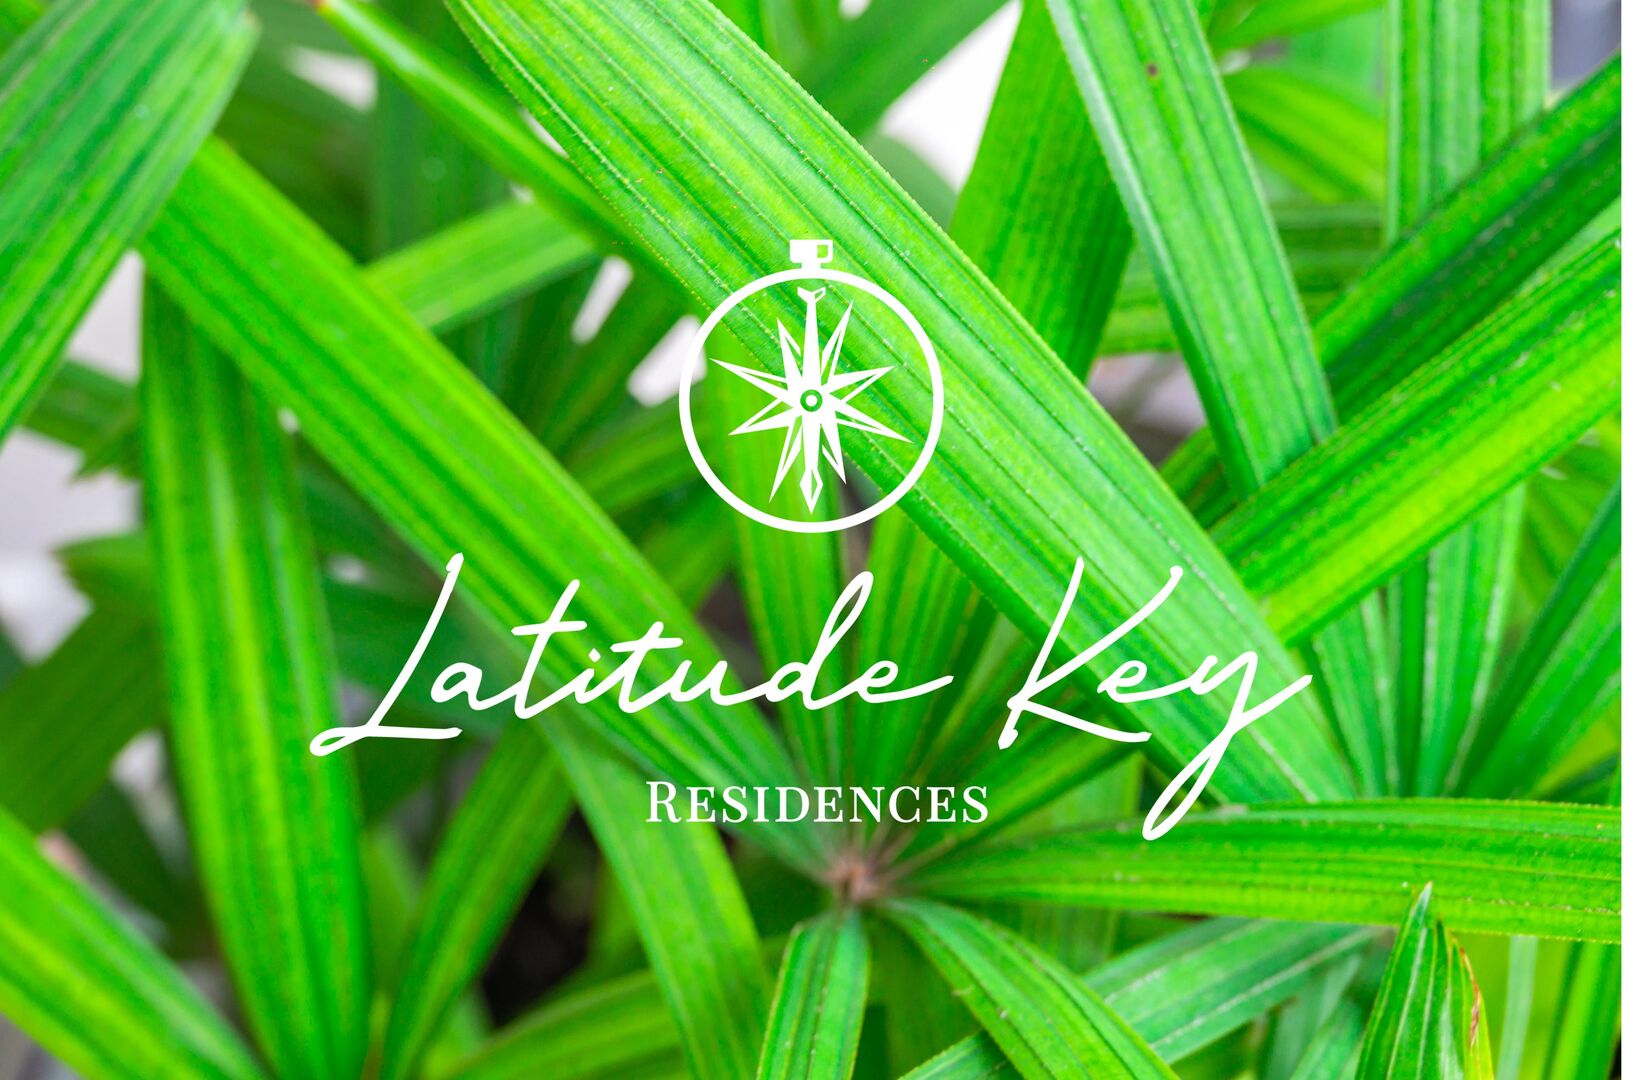 Nurmi Key is part of the Residences Collection. 
Enjoy a stress free vacation with Latitude Key - Curated Vacation Properties.